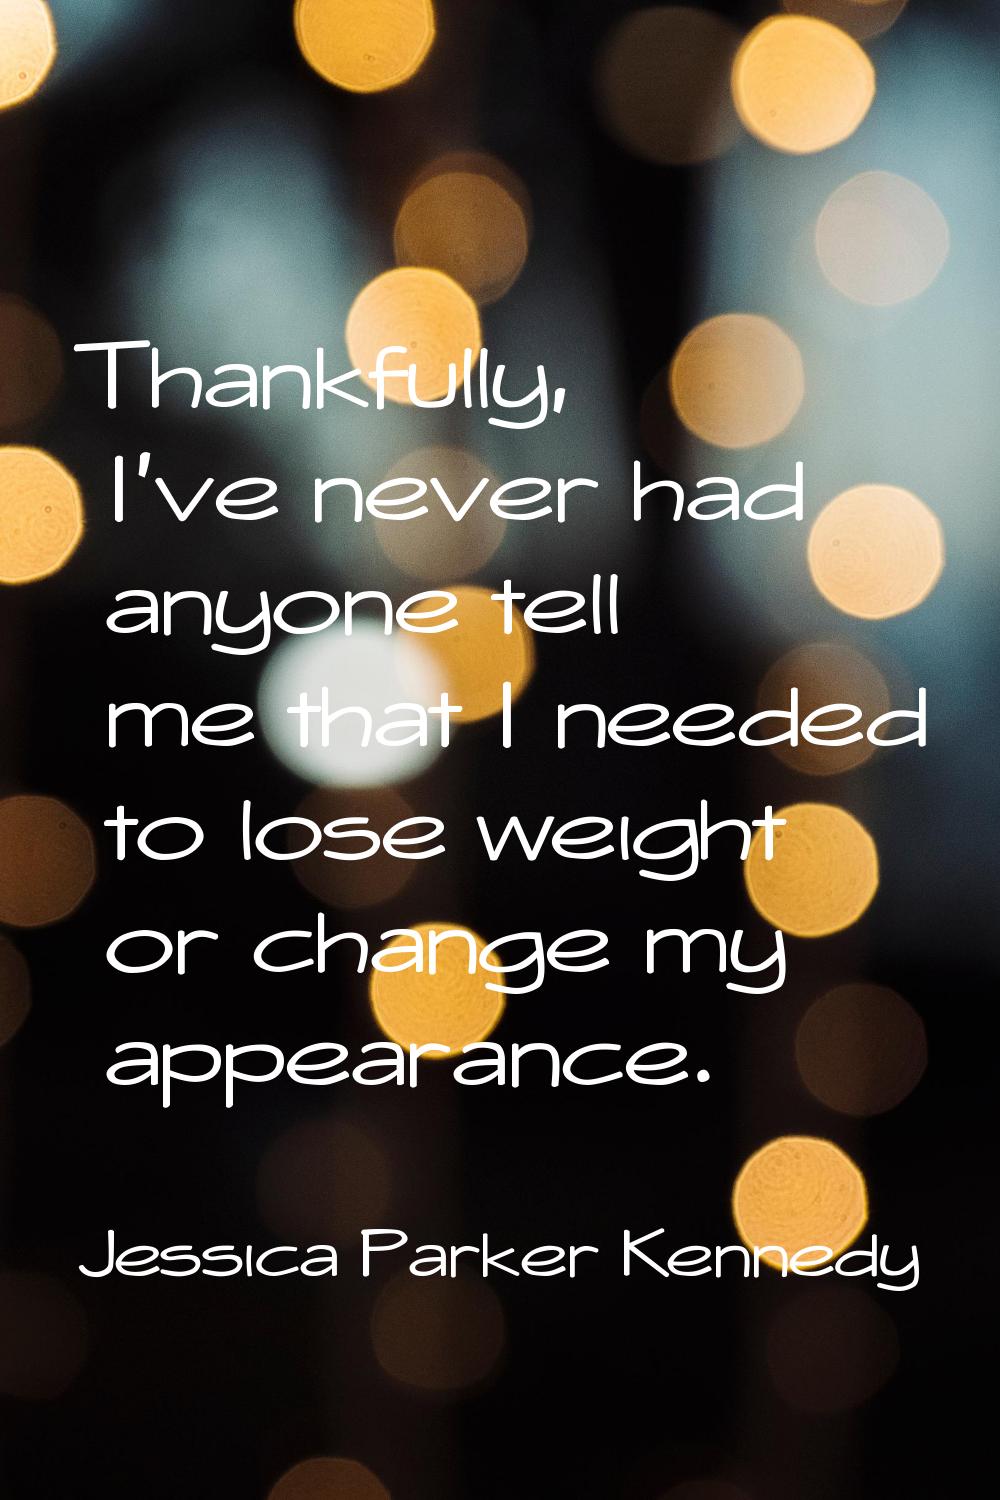 Thankfully, I've never had anyone tell me that I needed to lose weight or change my appearance.